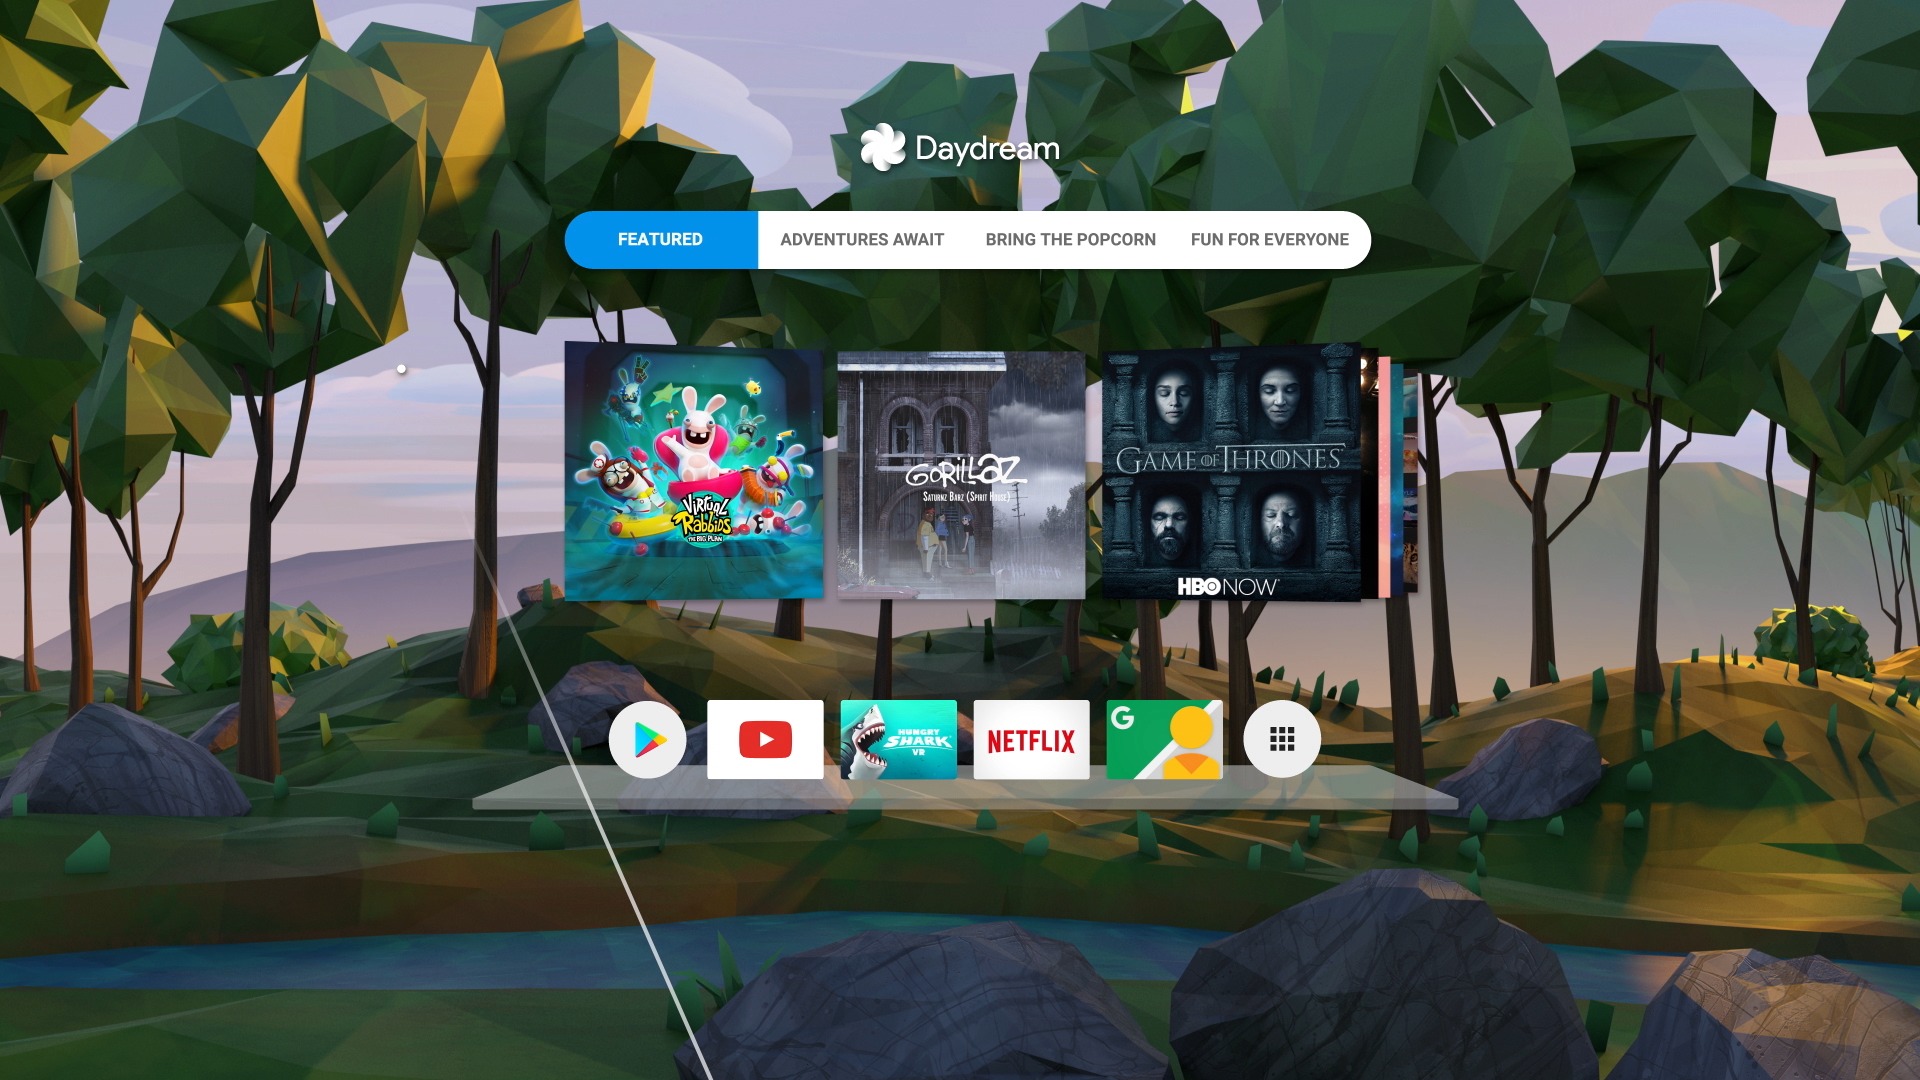 Daydream 2.0 Platform Update to Bring Major Improvements to All Daydream Devices